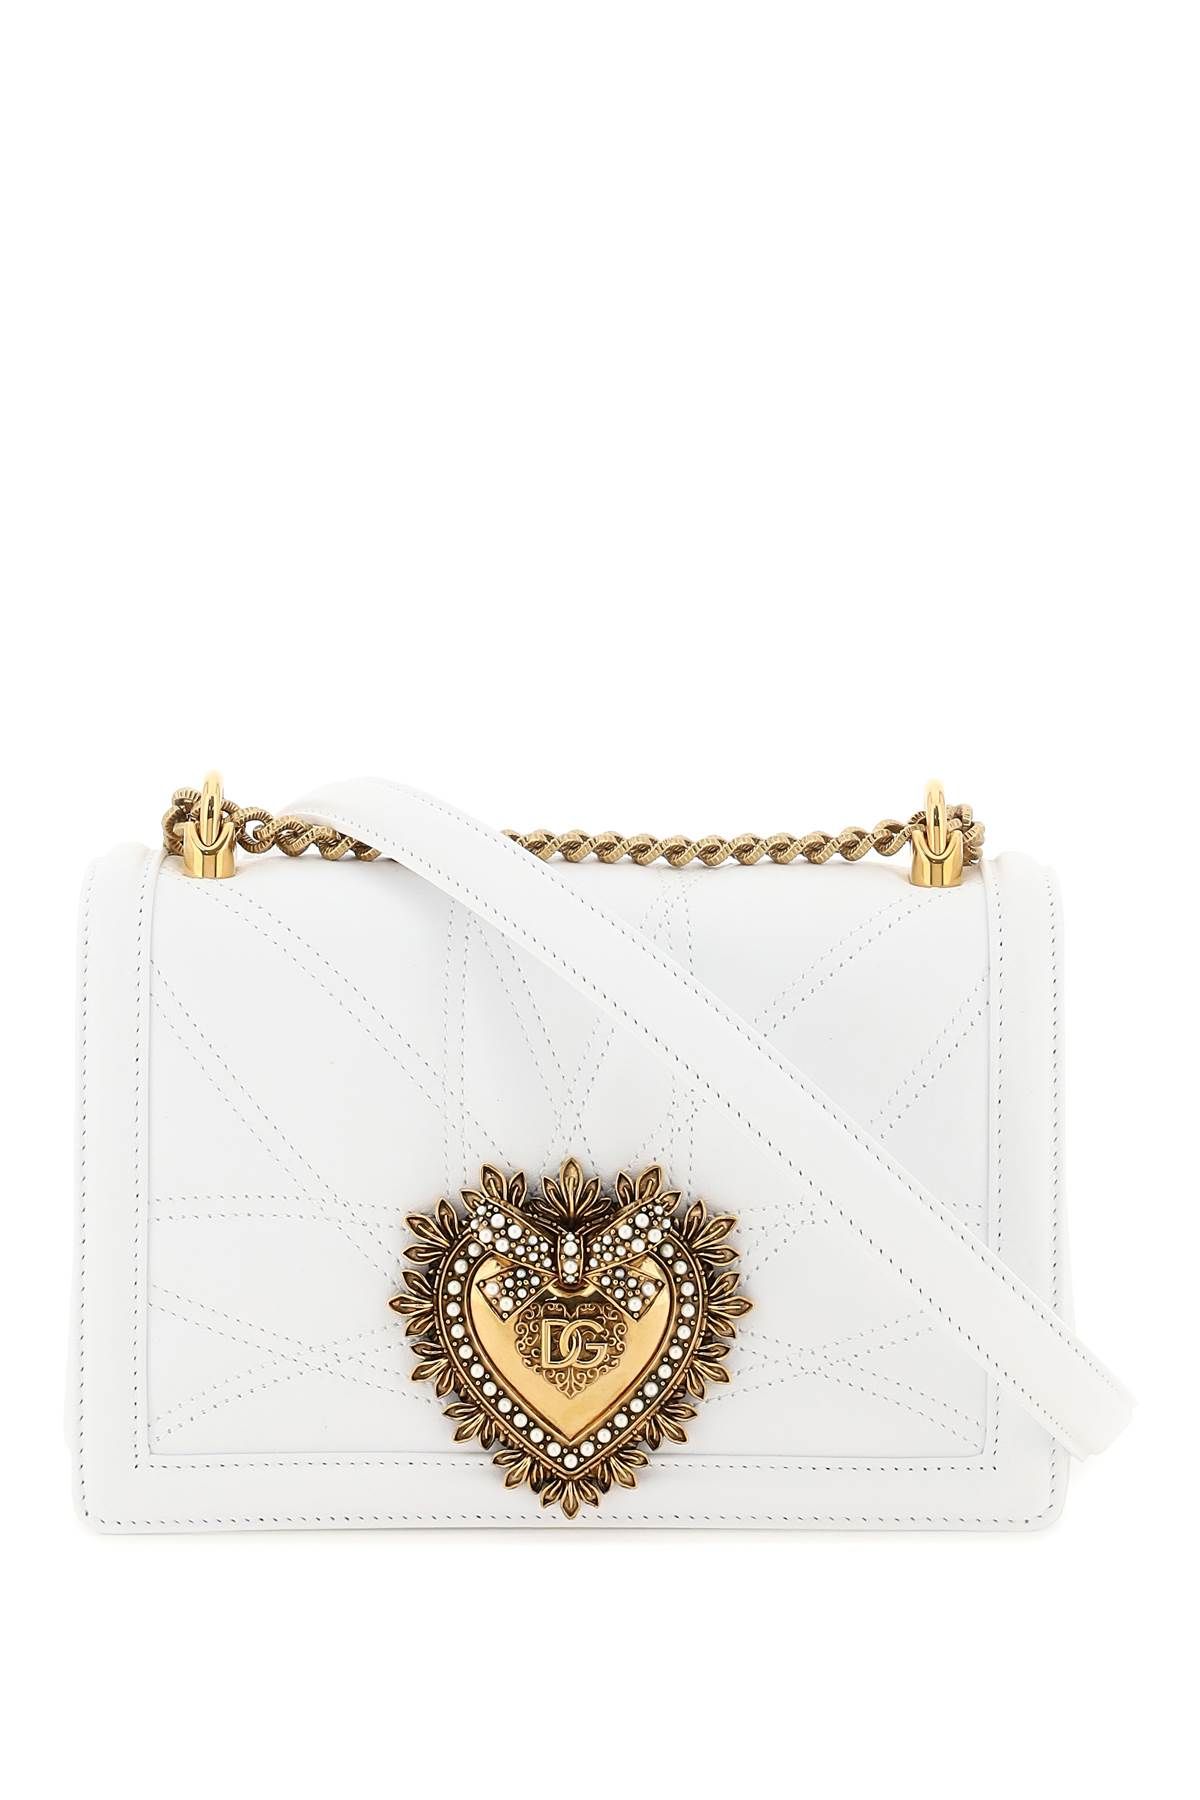 Dolce & Gabbana DOLCE & GABBANA medium 'devotion' bag in quilted nappa leather